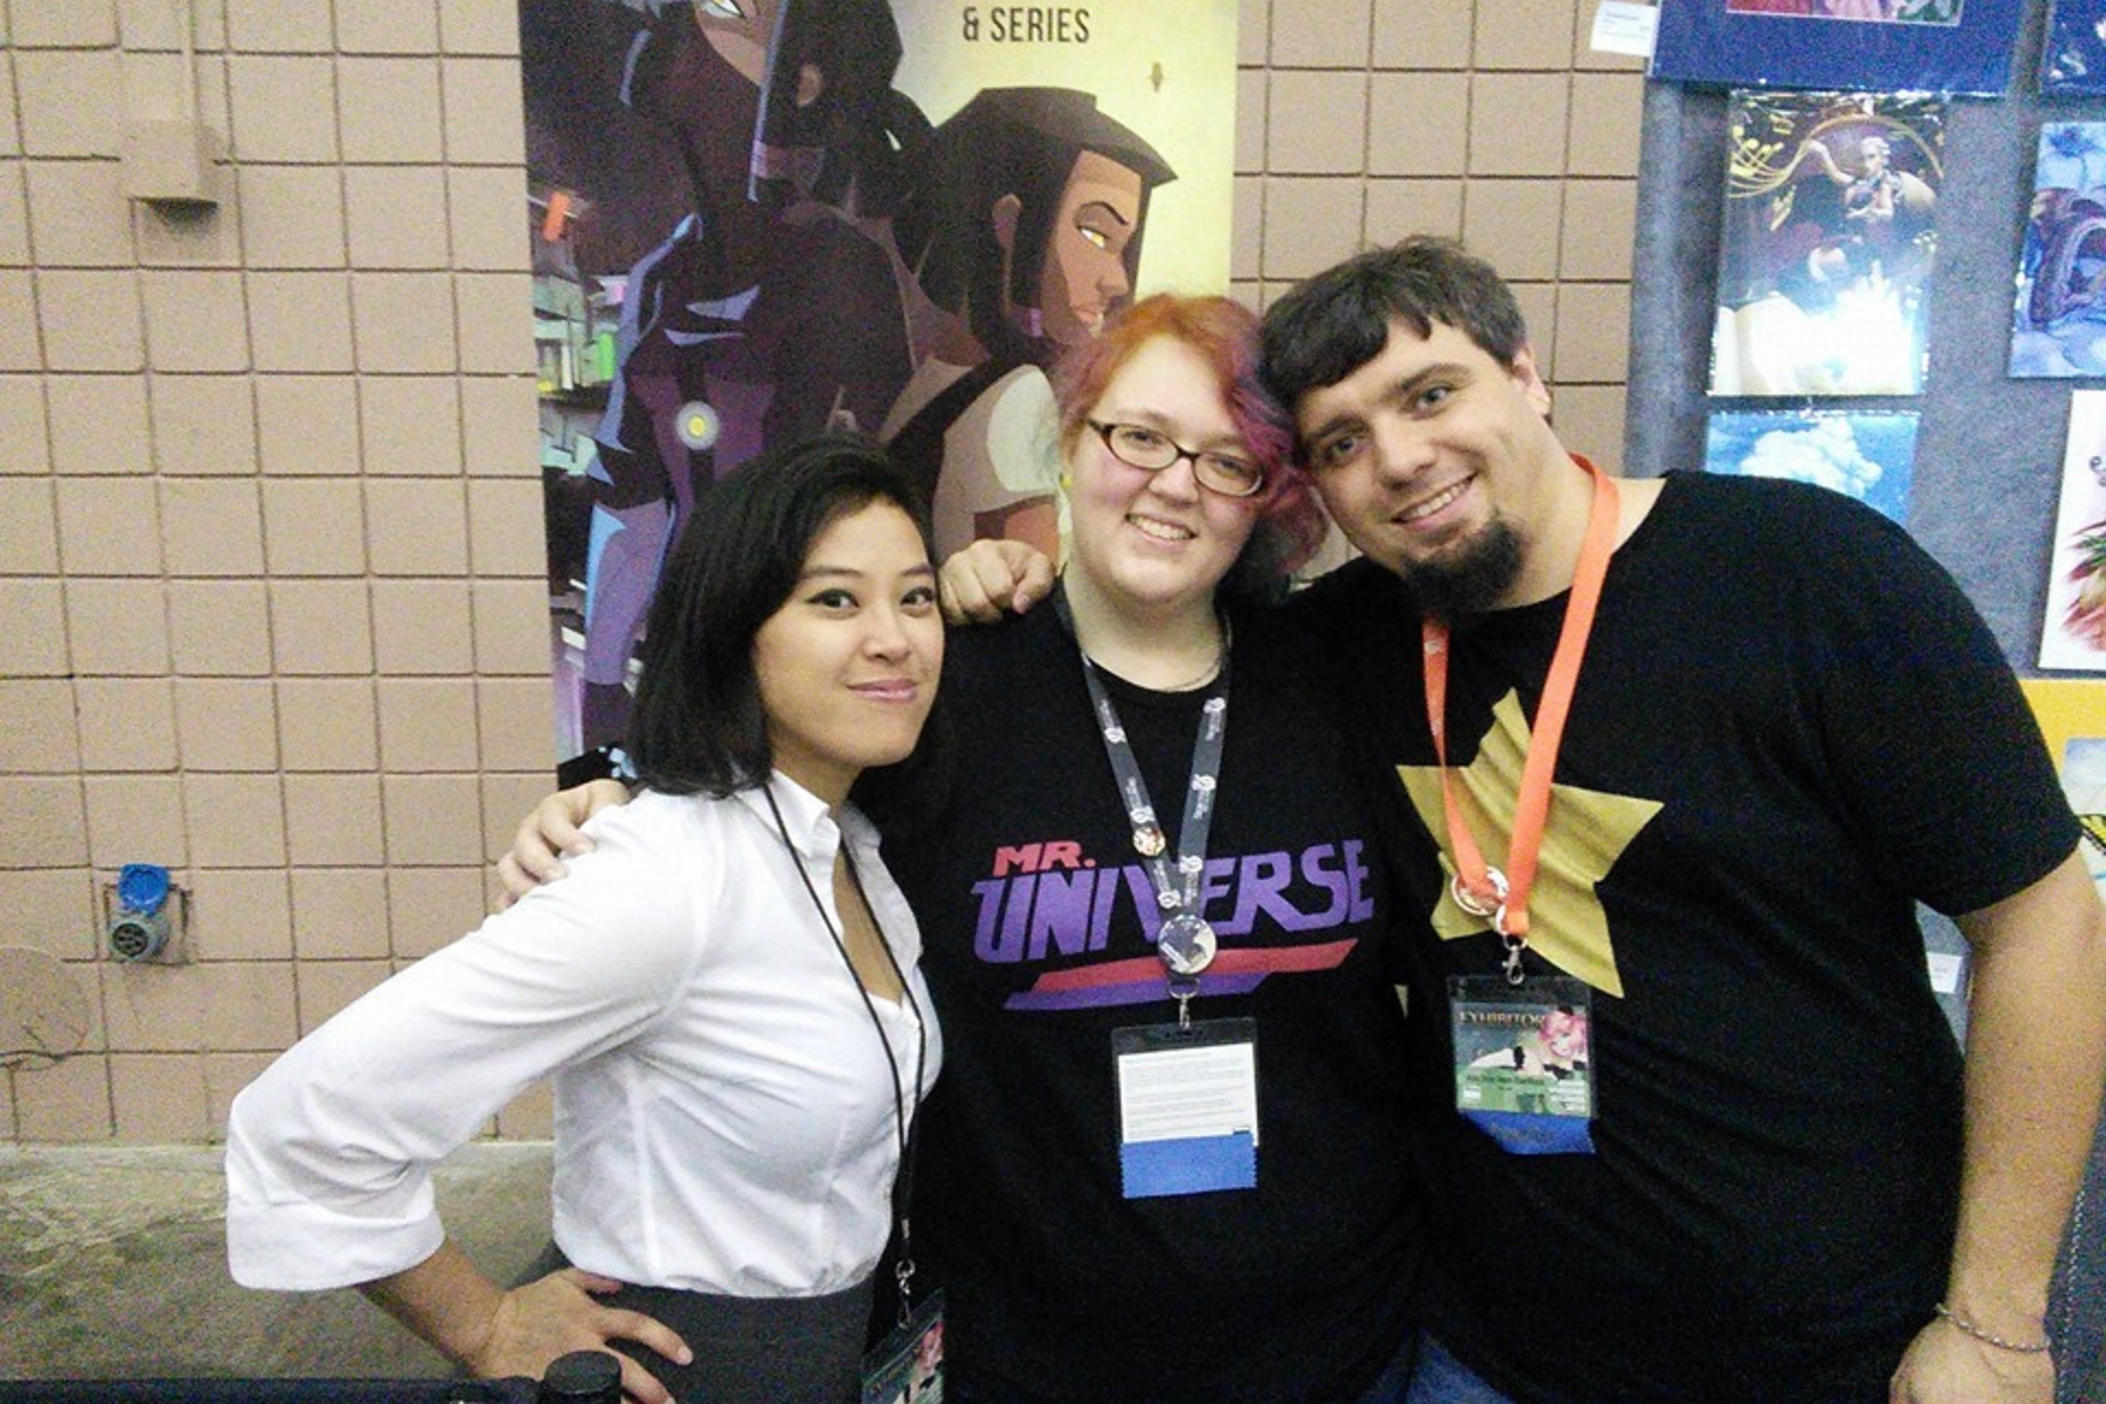 Creators Havana Nguyen, Carrie Tupper and Alan Tupper raised $30,000 to turn their web comic into an animated short. It won Best Georgia Short at the Georgia Film Festival this month.